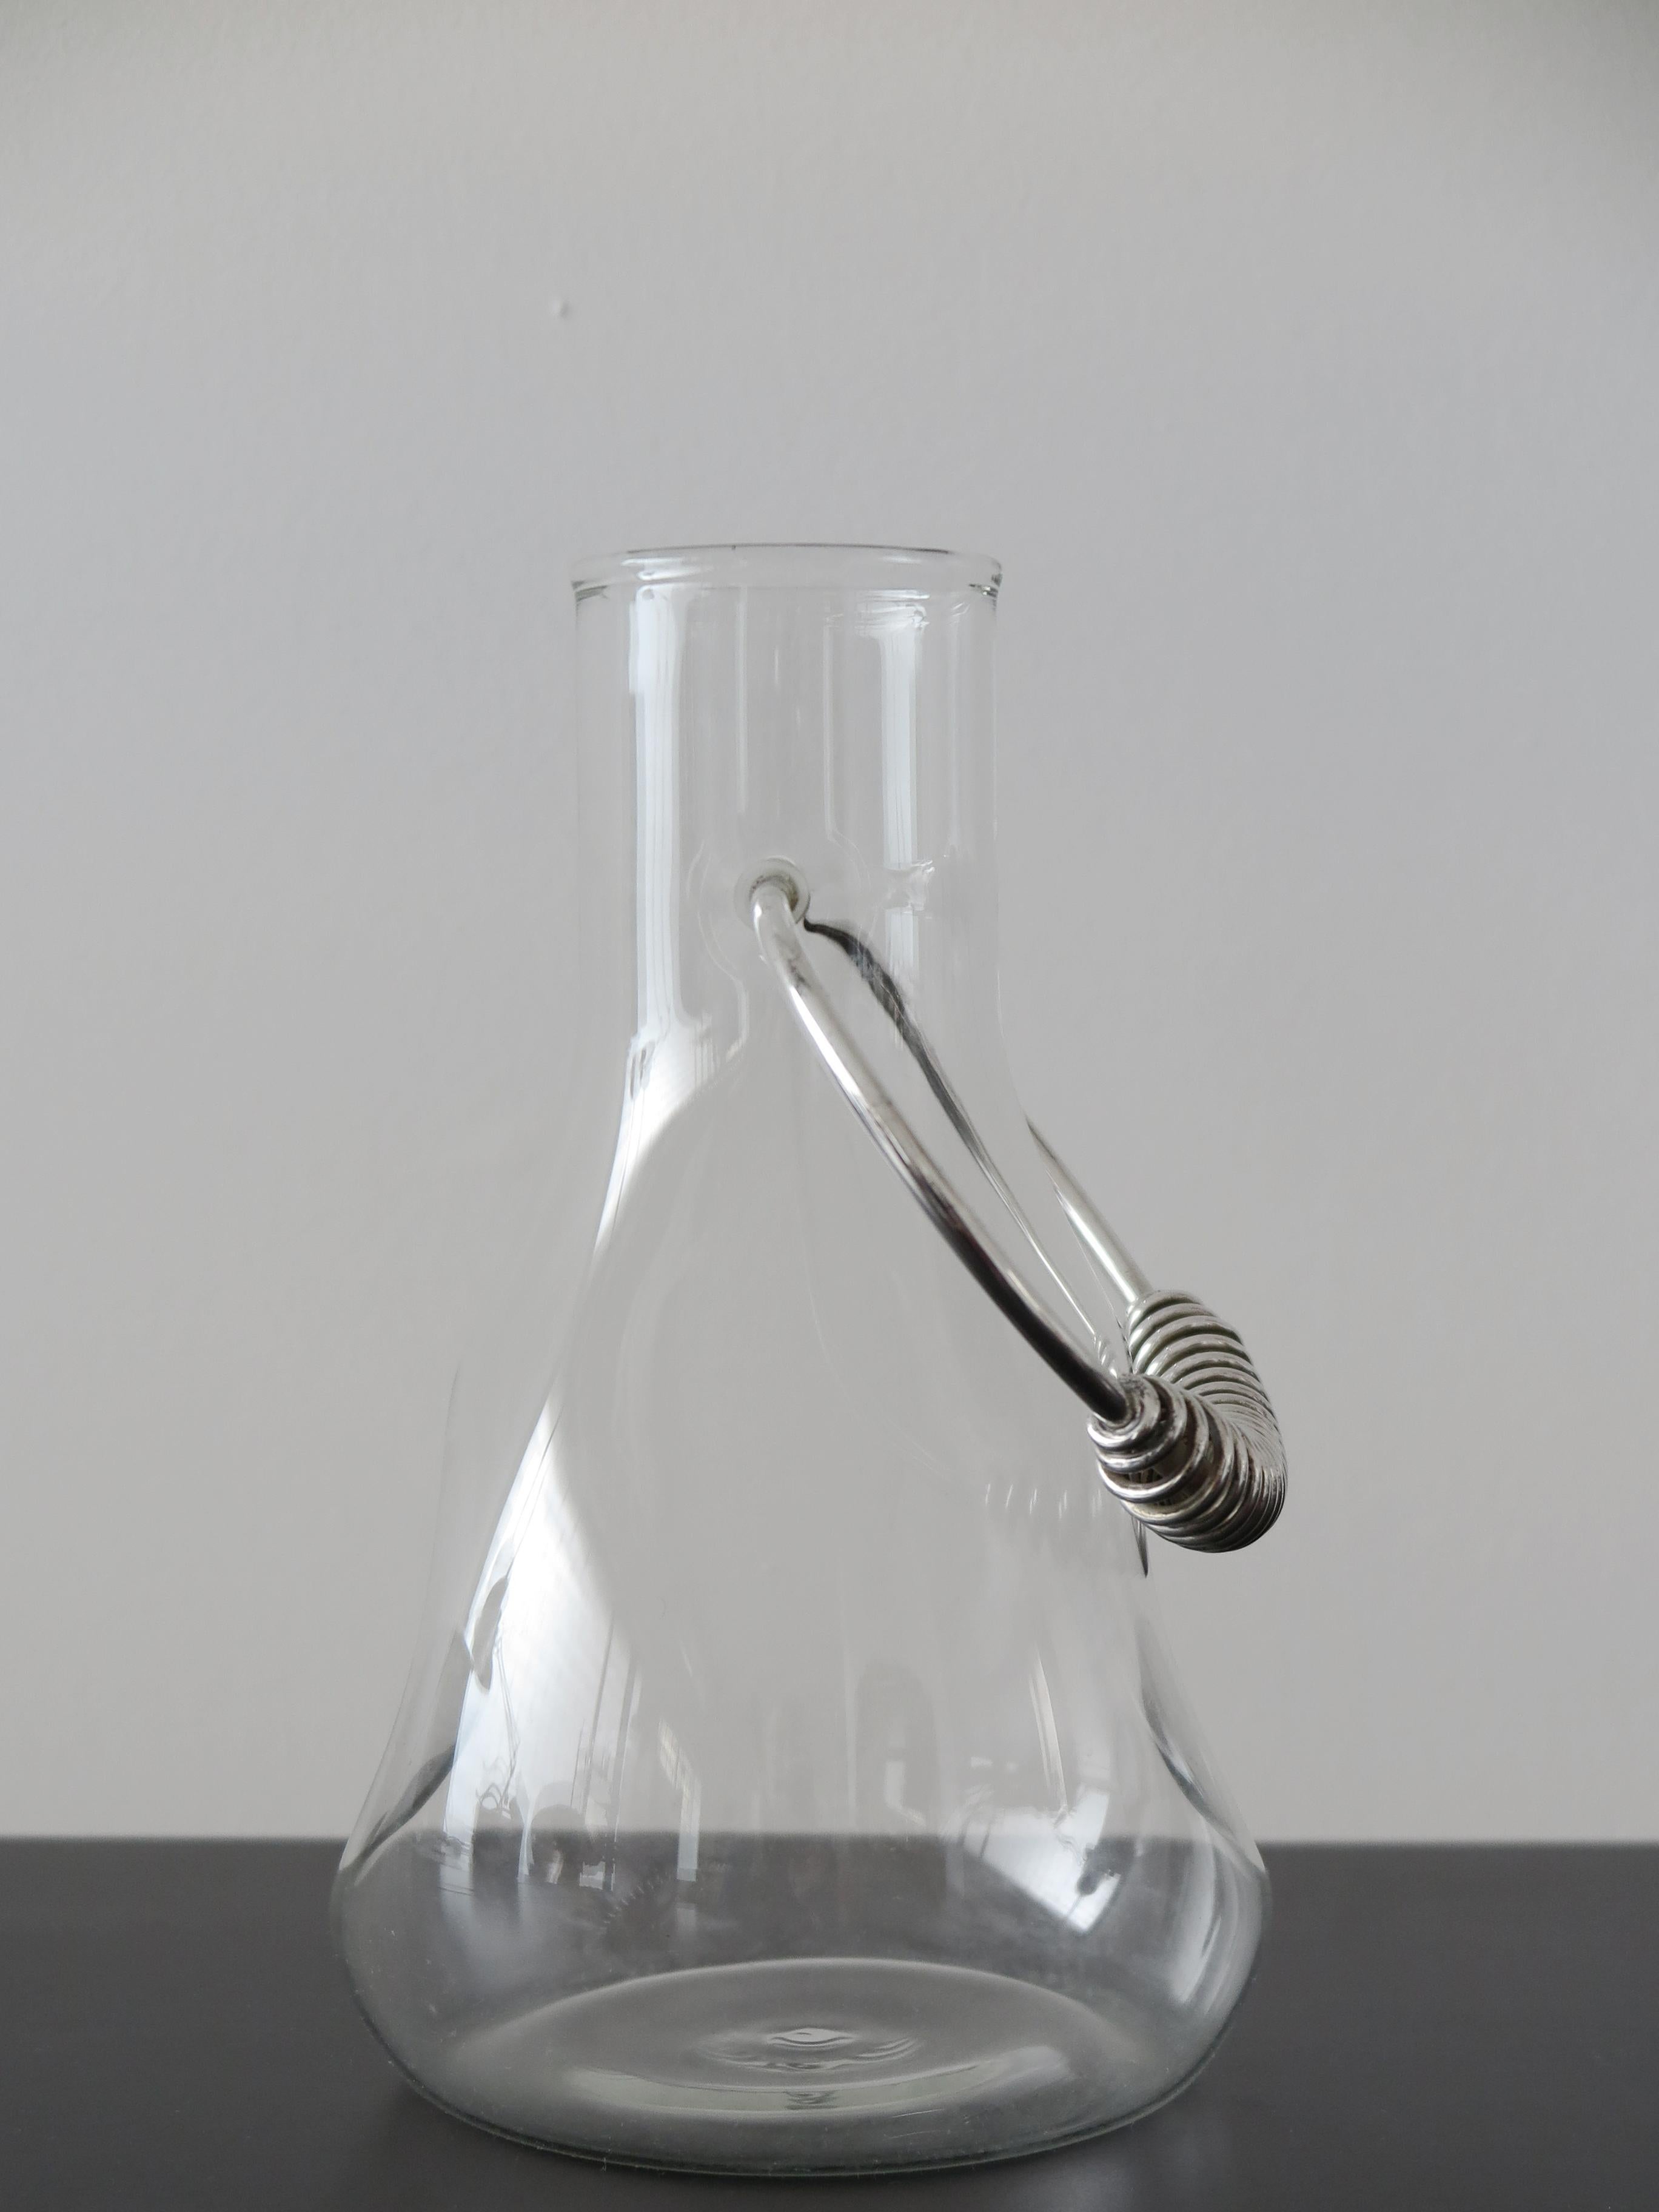 Italian glass carafe jug with silvered metal handle designed by Lino Sabattini and manufactured by Argenterie Sabattini, Italy 1970s

Please note that the item is original of the period and this shows normal signs of age and use.